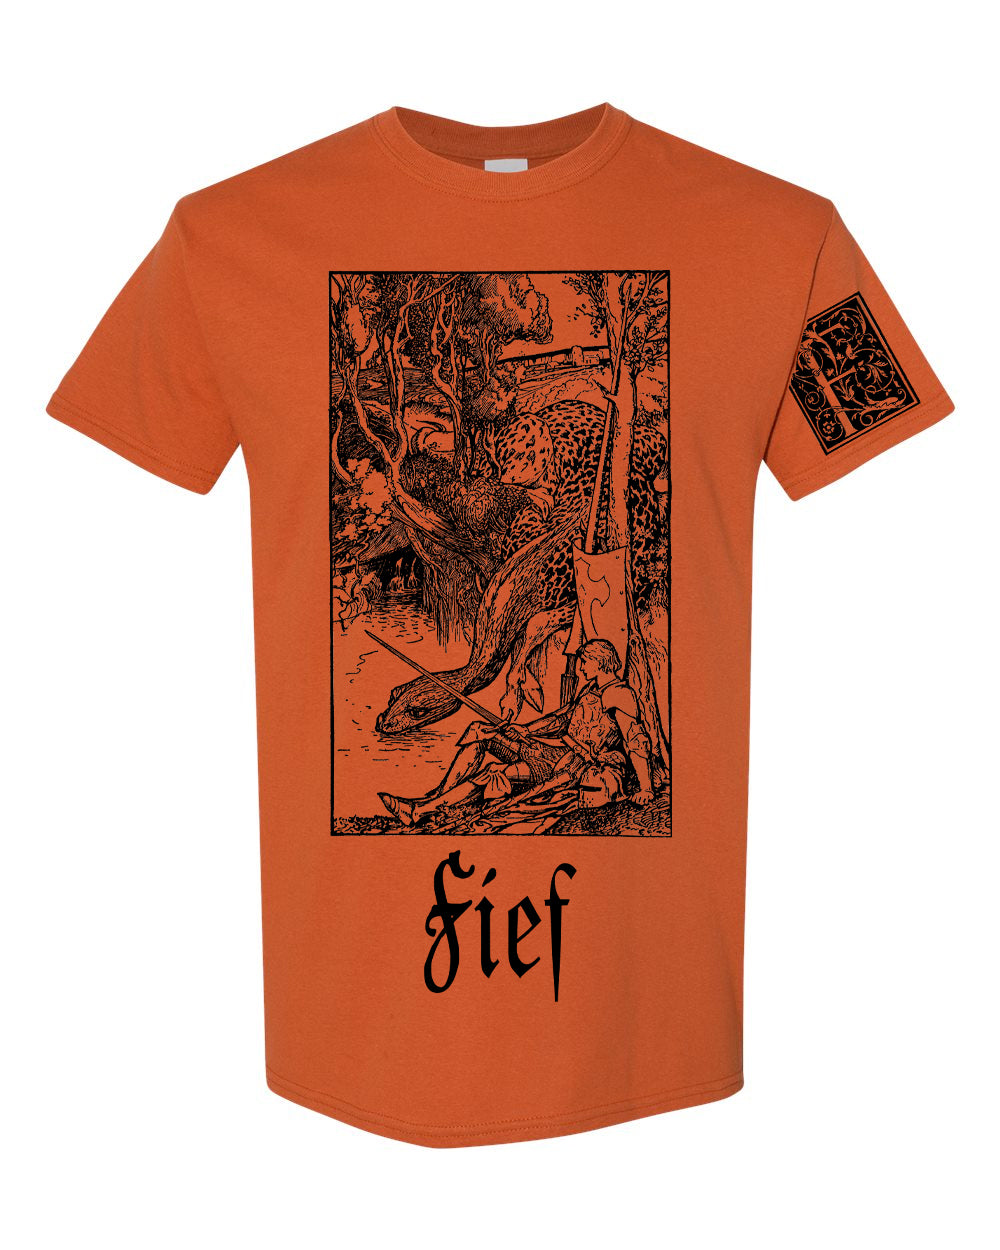 FIEF "To Rest in the Shade of Dragon Wings" T-Shirt [BURNT ORANGE]